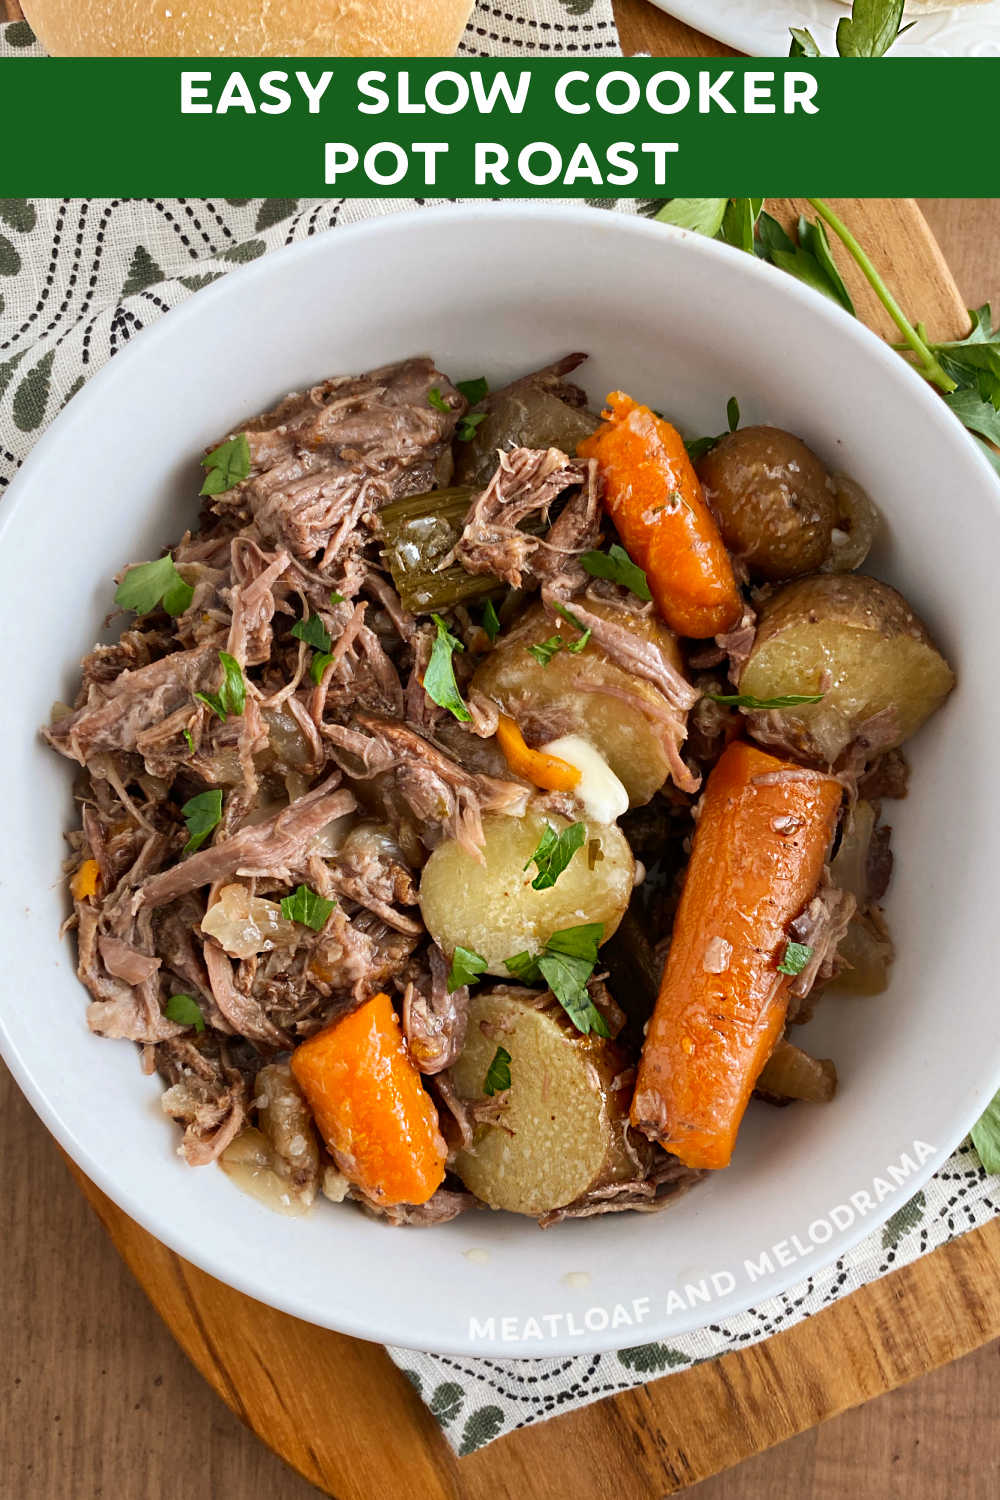 Easy Slow Cooker Pot Roast with potatoes and carrots cooks on low in the Crock Pot until fork tender and delicious. A family favorite recipe for a simple dinner that everyone loves! via @meamel